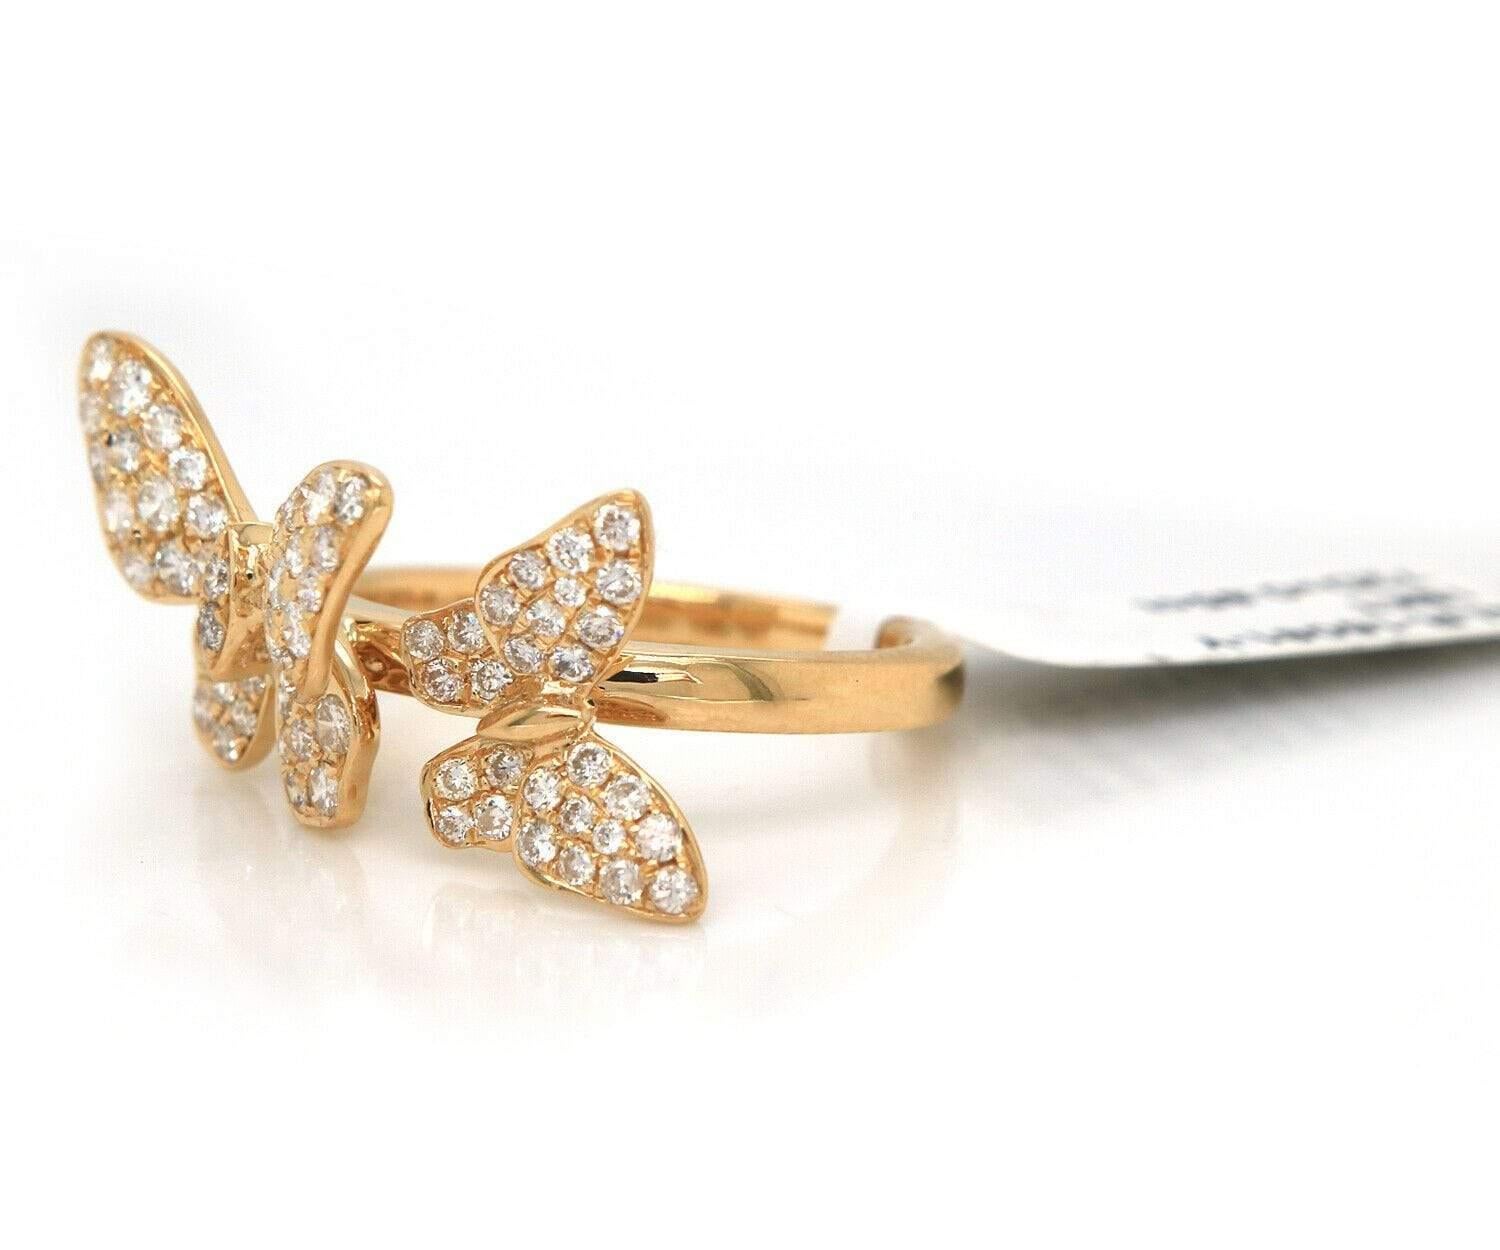 New 0.85ctw Pave Diamond Double Butterfly Ring in 18K

Pave Diamond Double Butterfly Ring
18K Yellow Gold
Diamonds Carat Weight: Approx. 0.85ctw
Ring Size: 6.0 (US)
Weight: Approx. 4.90 Grams
Stamped: 750

Condition:
Offered for your consideration